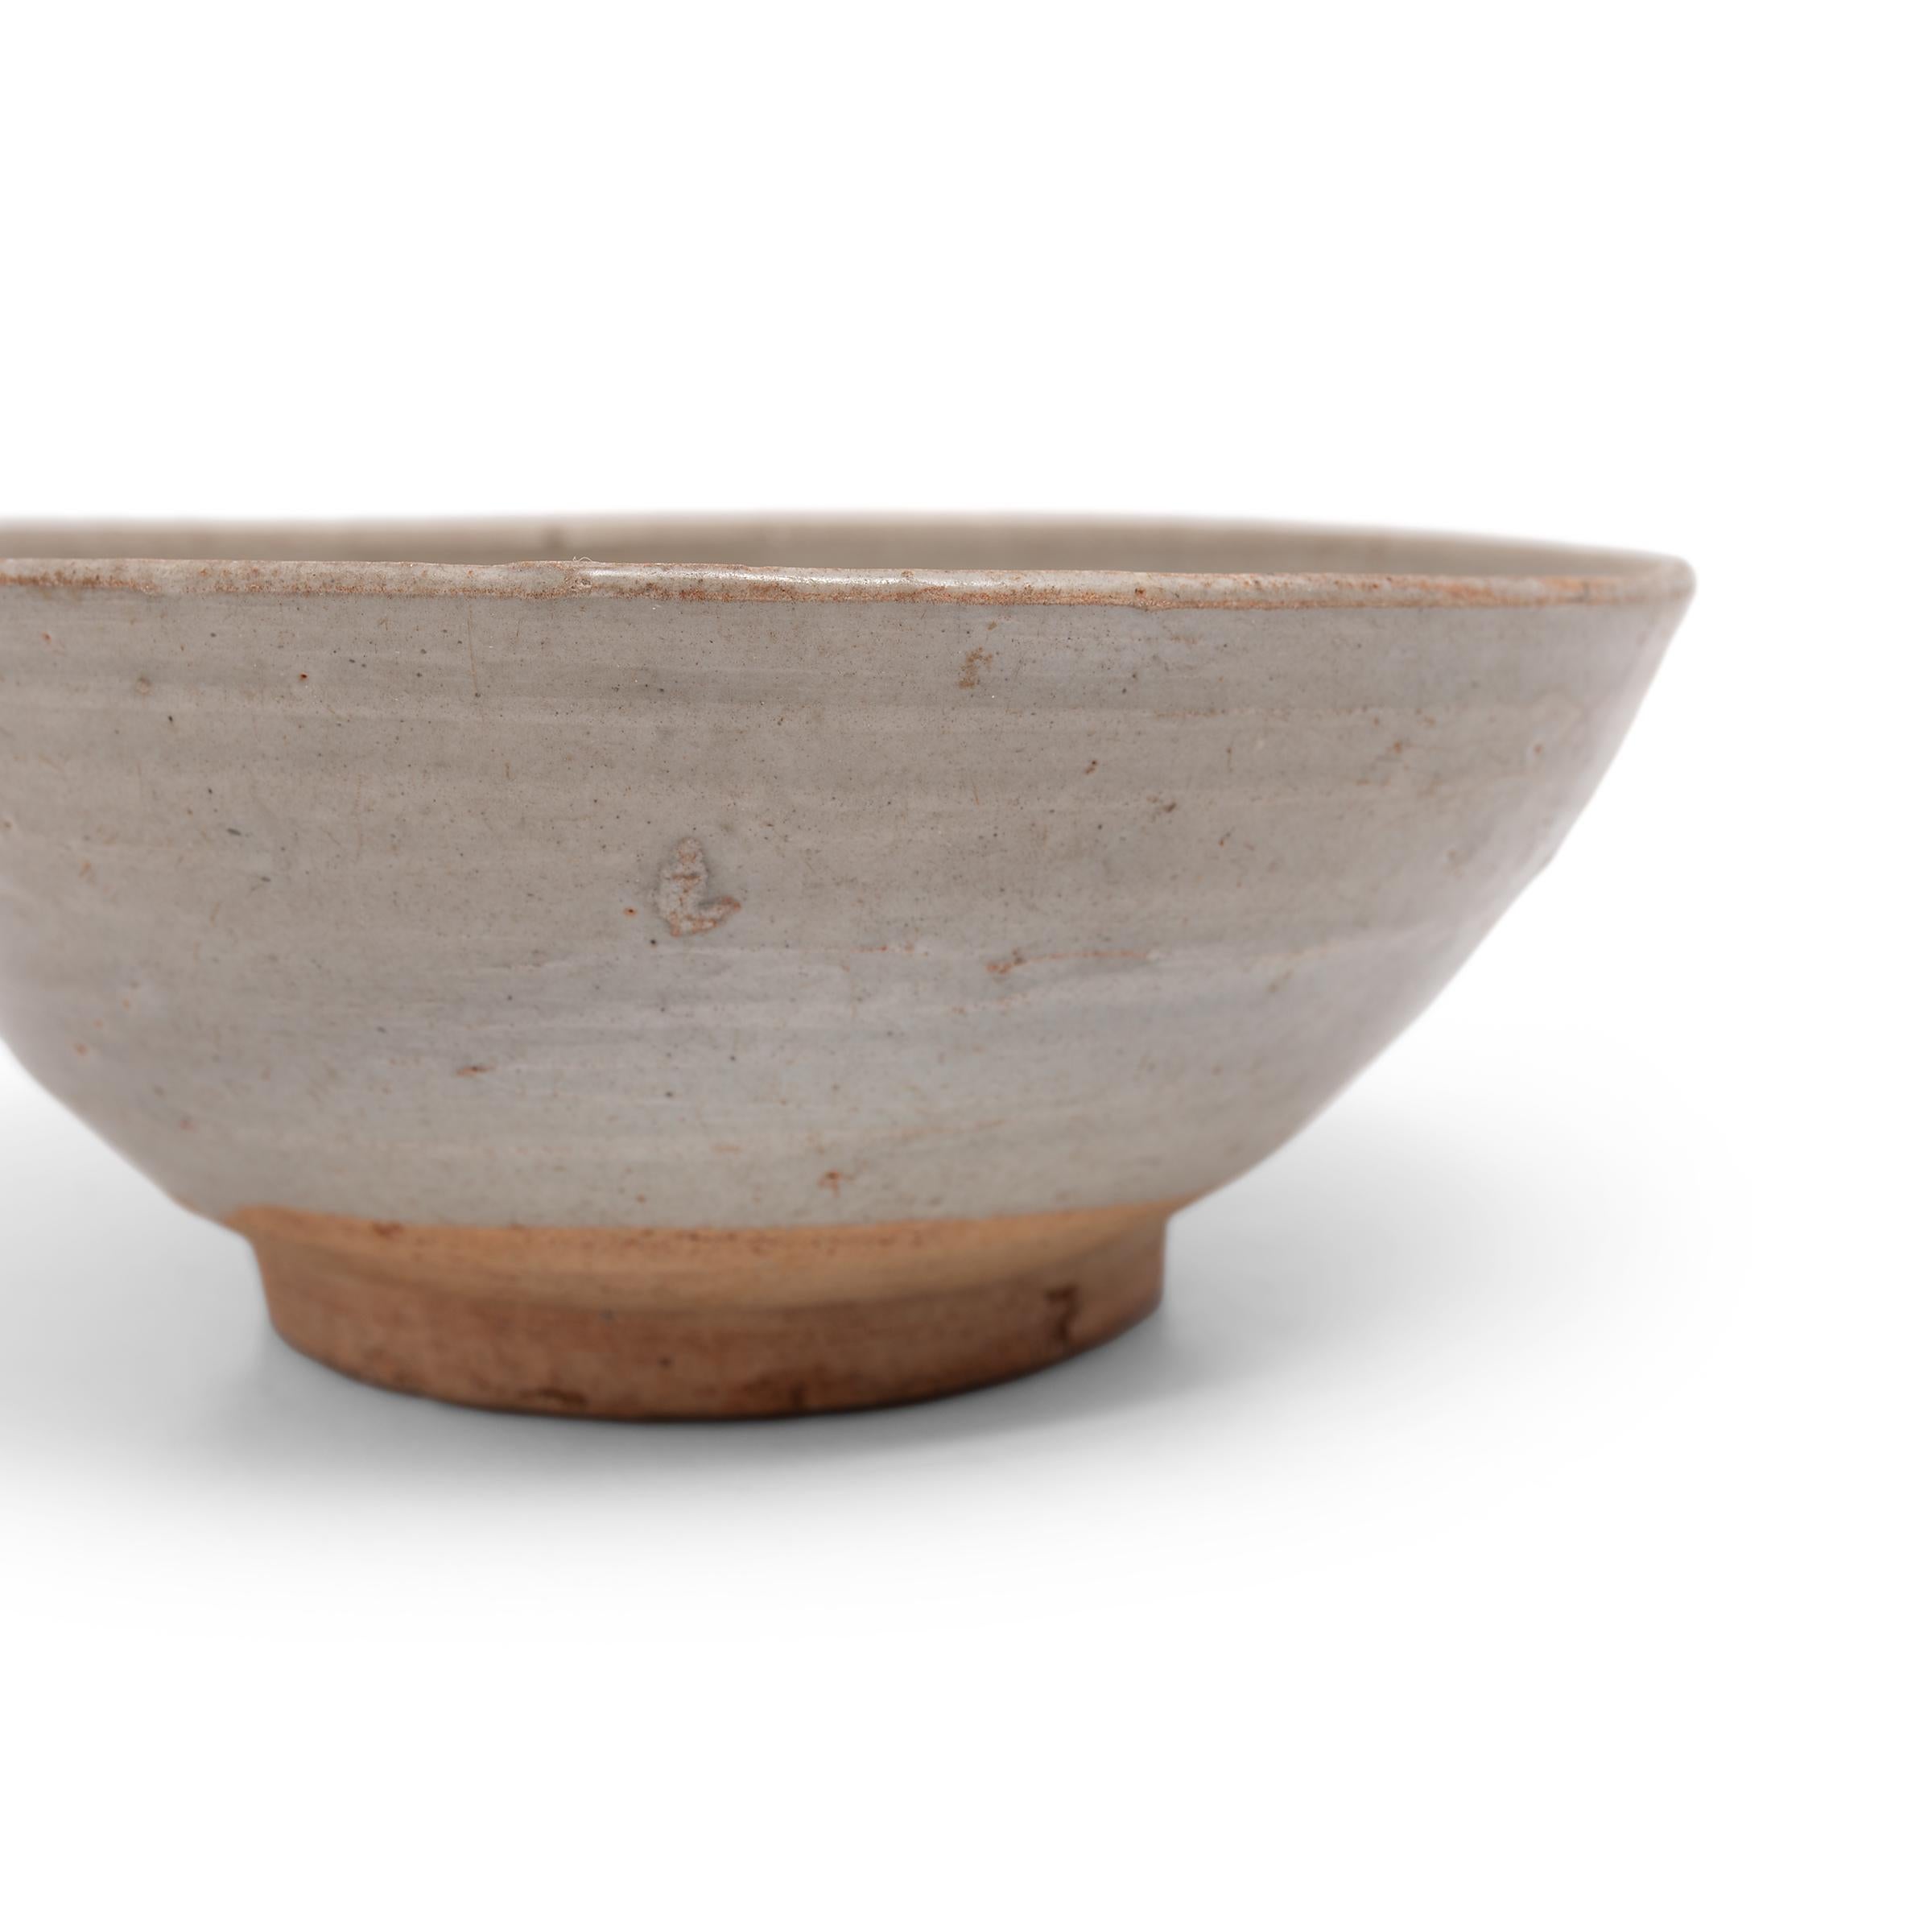 This 19th-century ceramic bowl is simply shaped with tapered sides and a heavy footed base. A cool grey glaze coats the bowl inside and out, pooling at the bottom with increased opacity. The footed base has been left unglazed, along with a circular